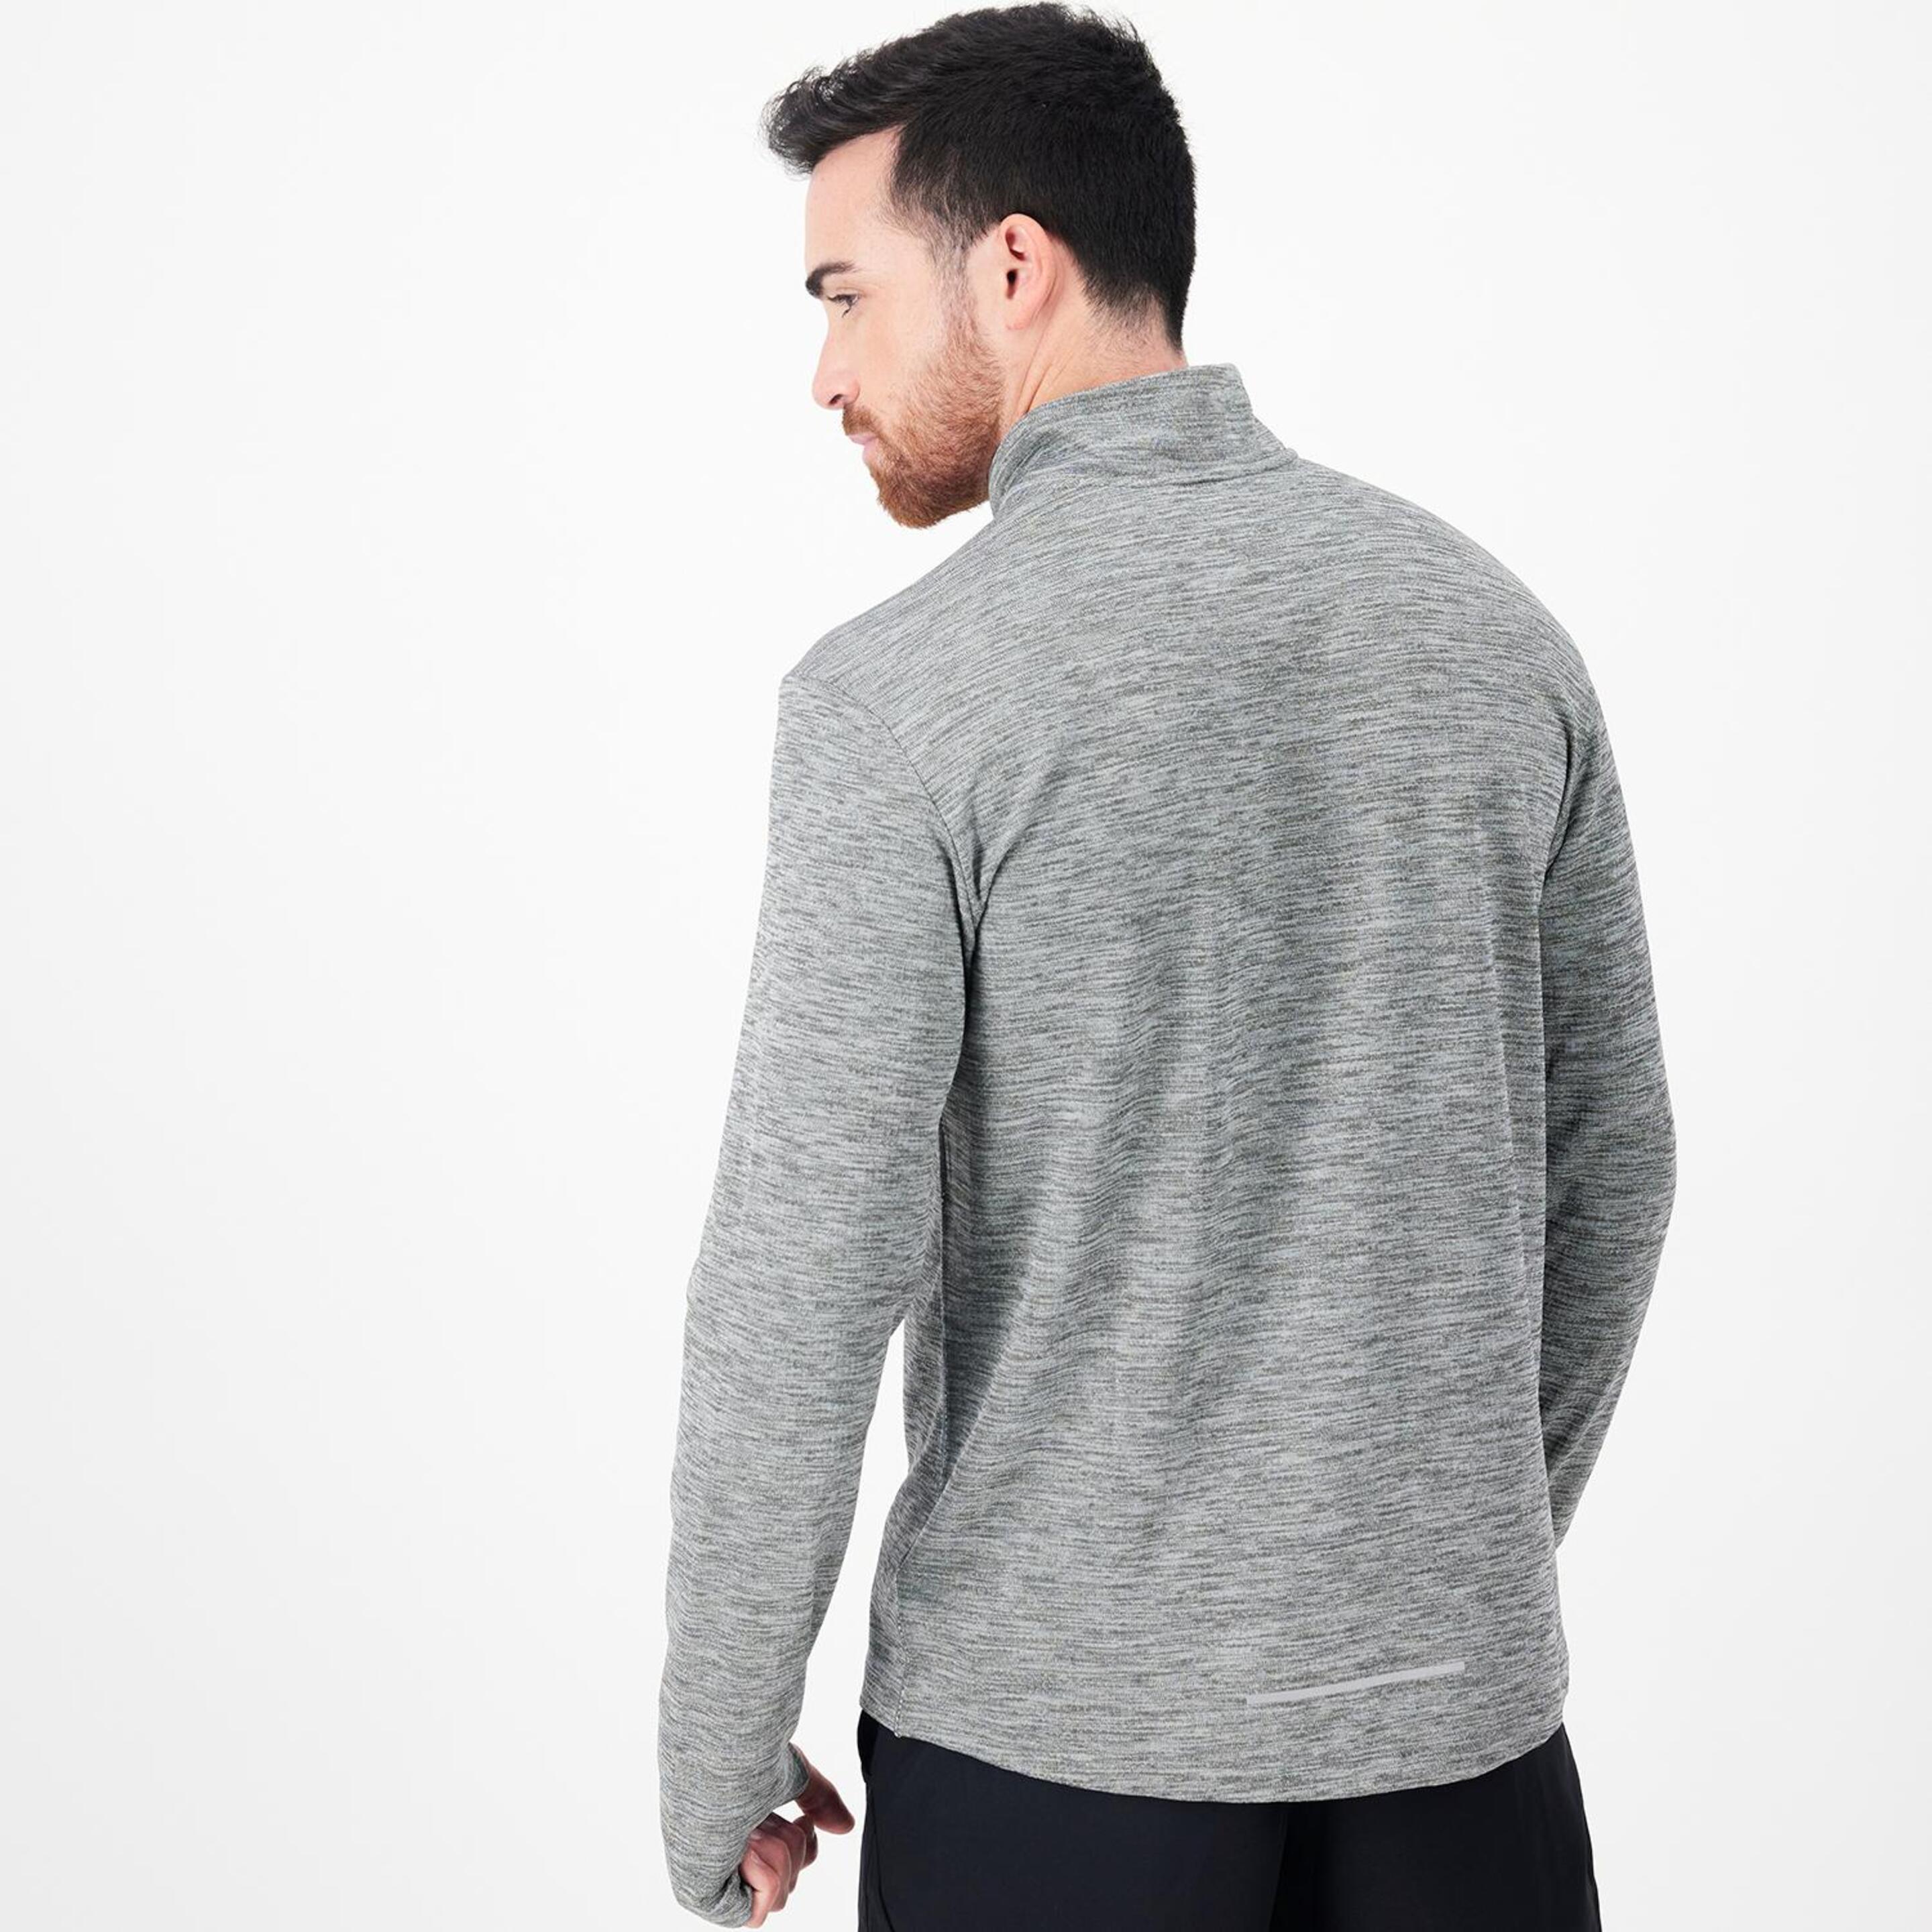 Nike Pacer - Gris - Sudadera Running Hombre